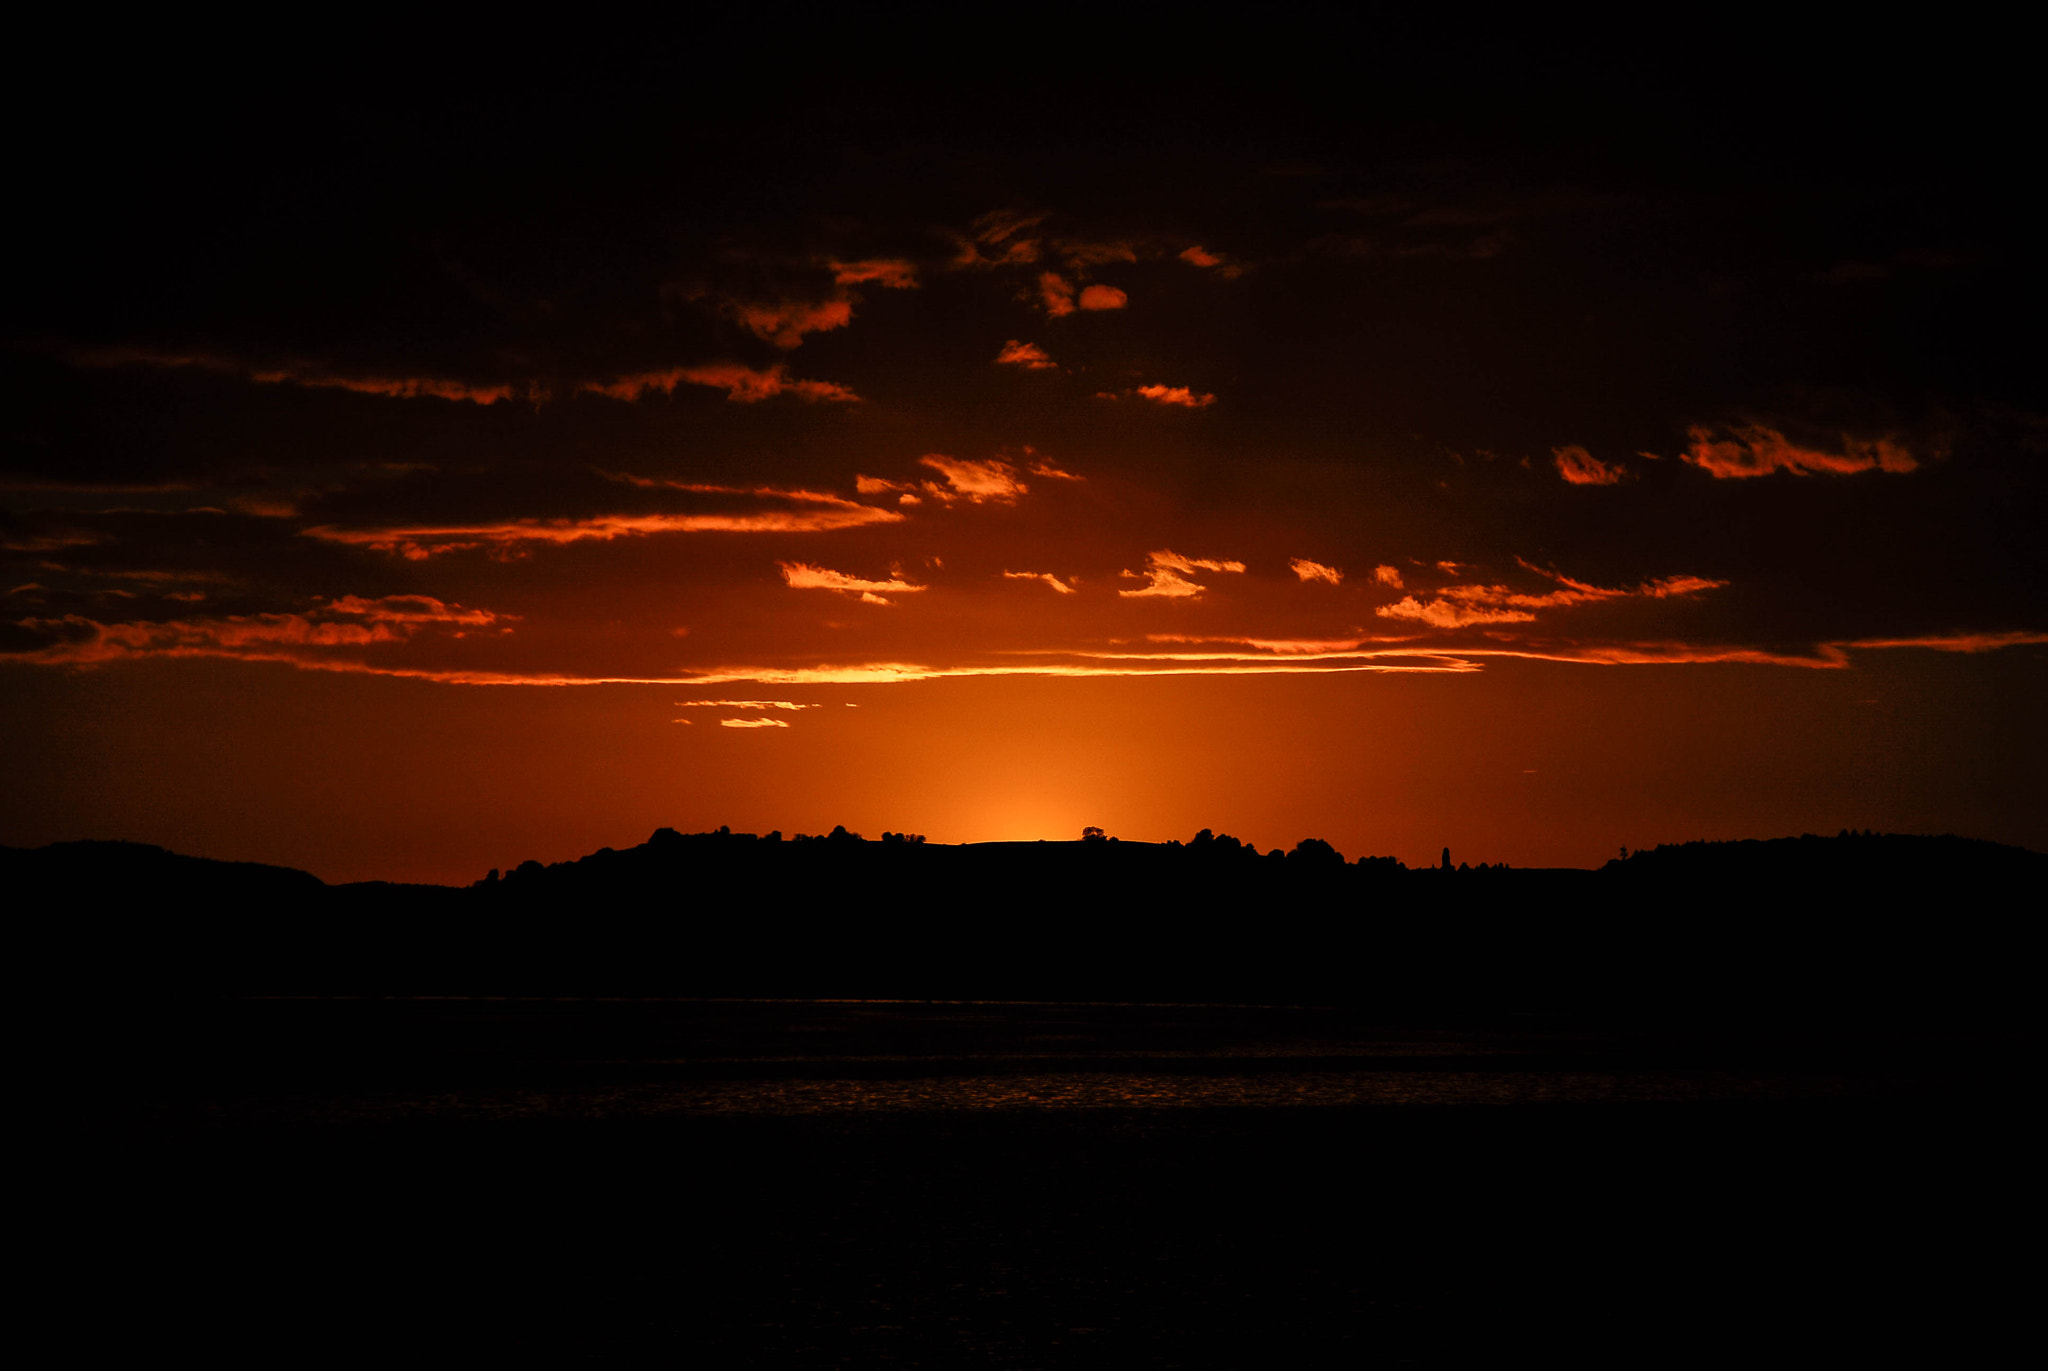 Nikon D200 + Sigma 18-125mm F3.8-5.6 DC HSM sample photo. Just this glowing sunset photography